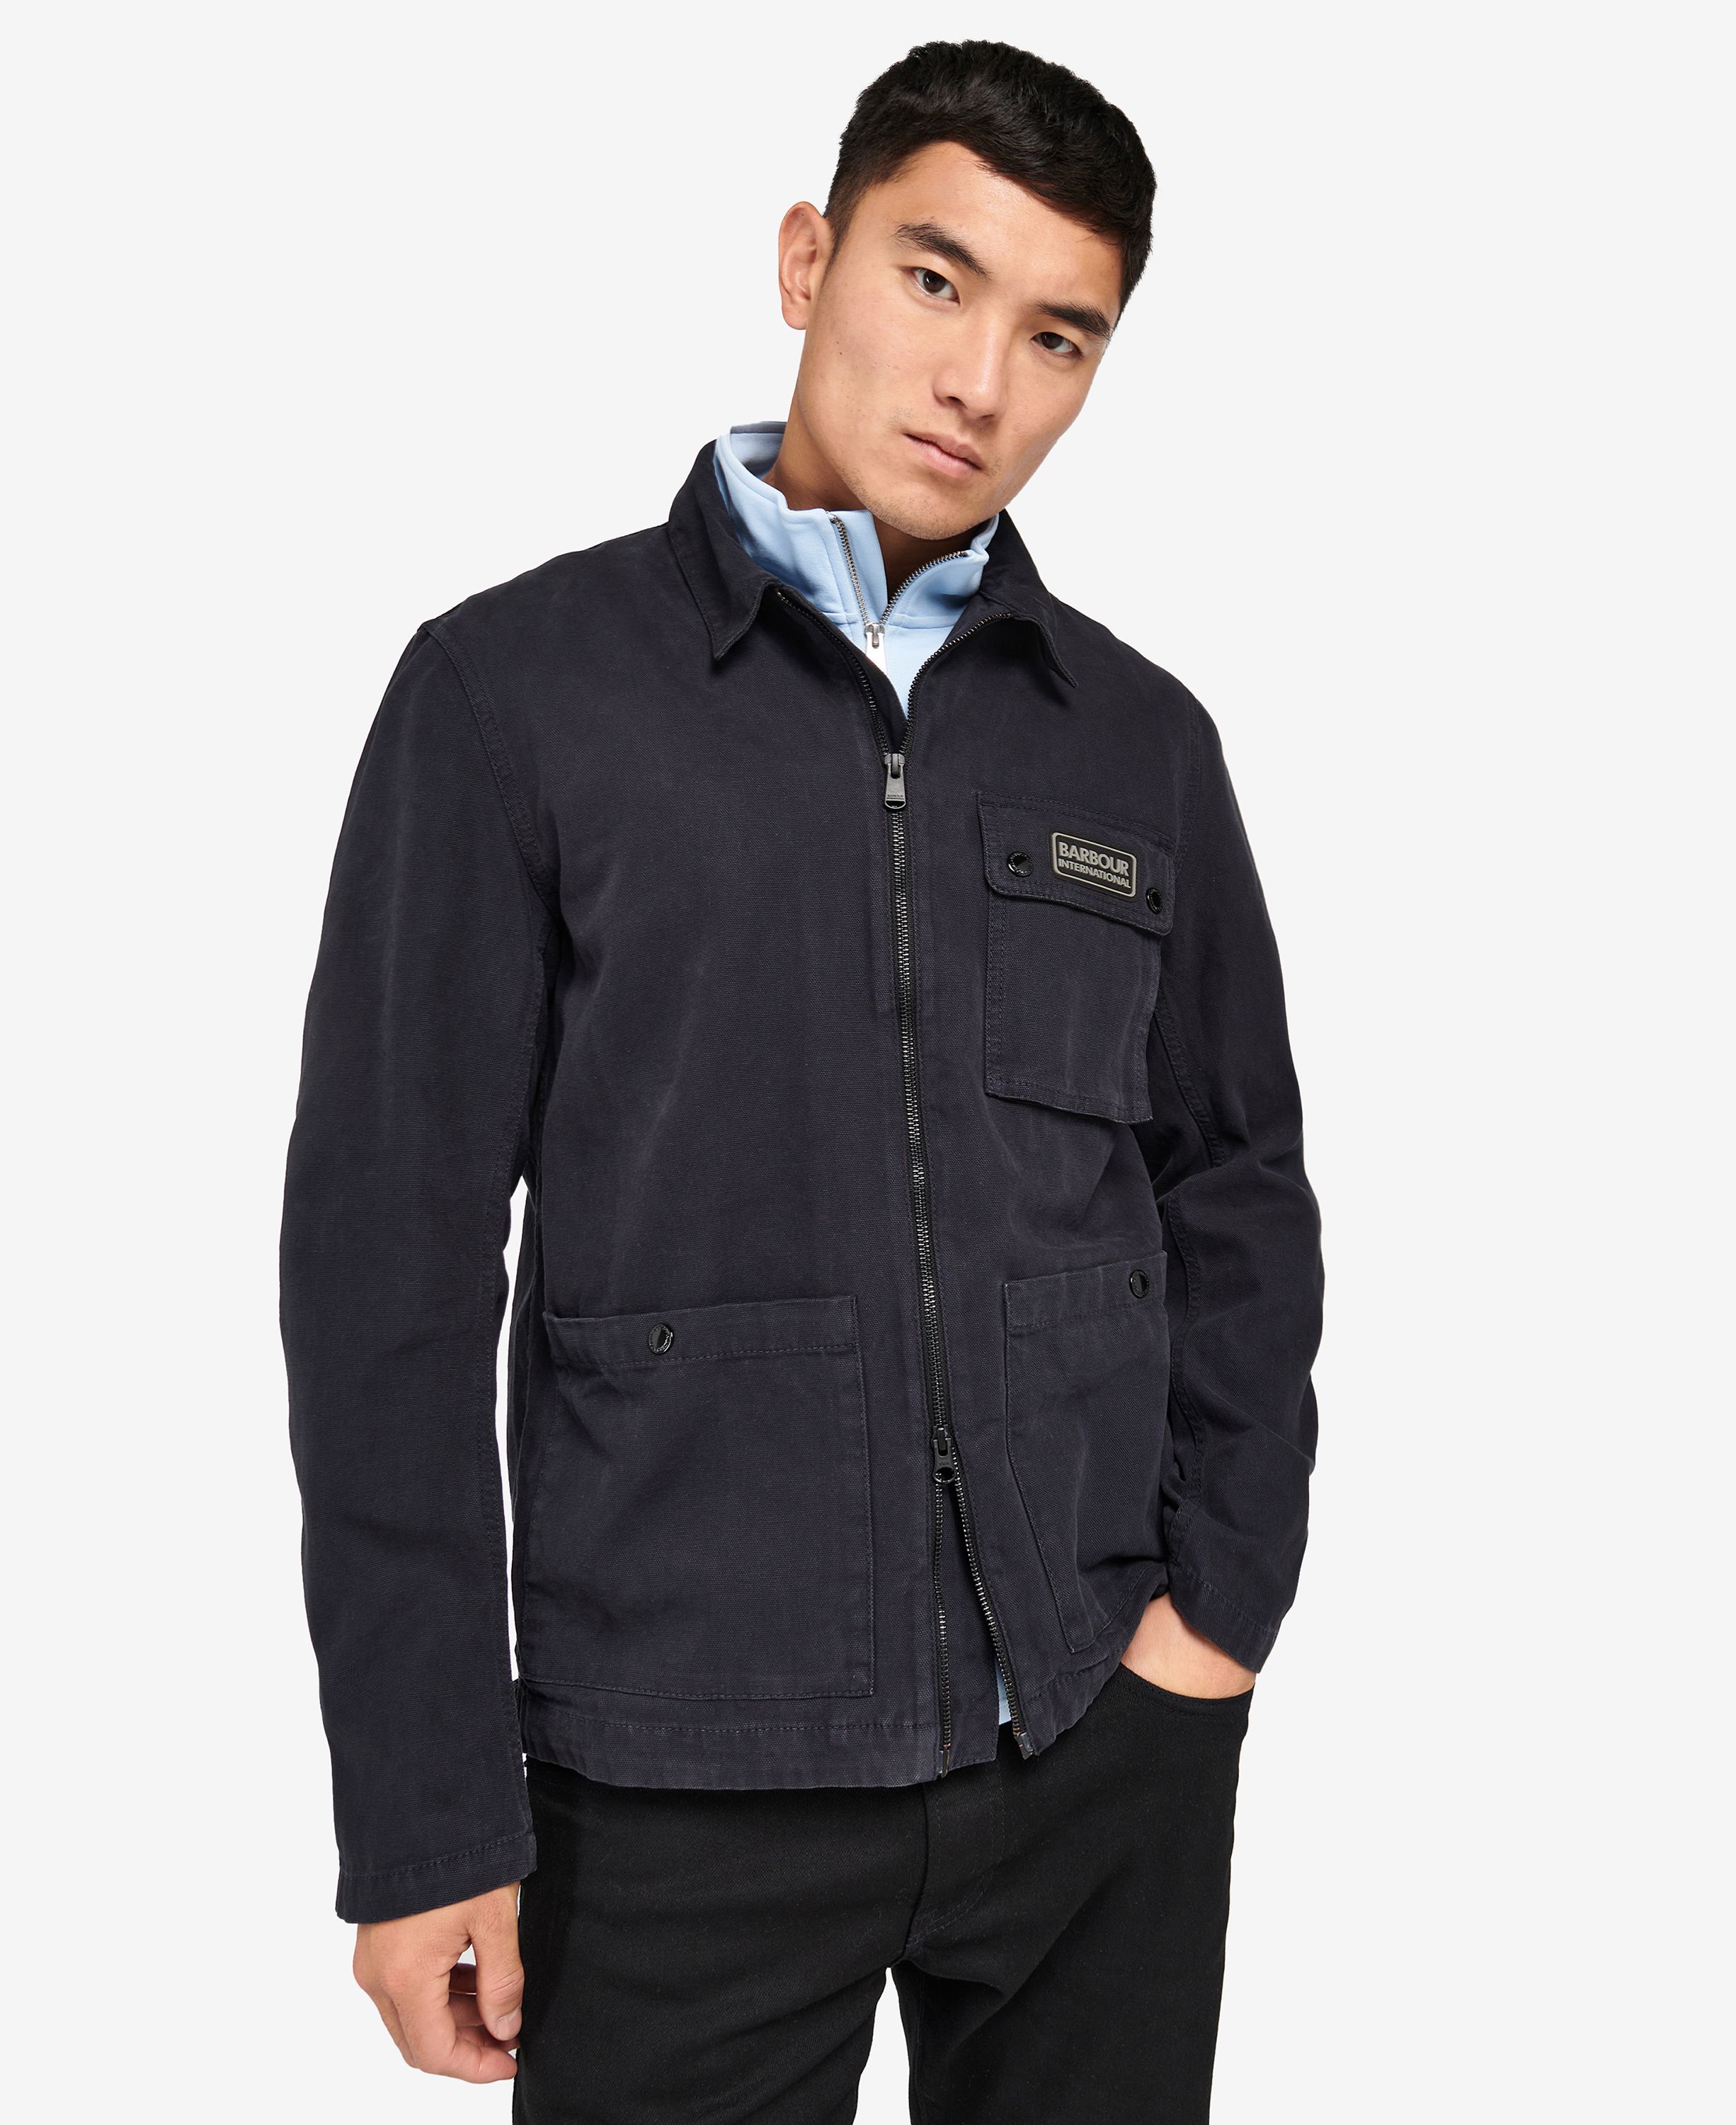 Shop the B.Intl Wilkinson Casual Jacket today. | Barbour